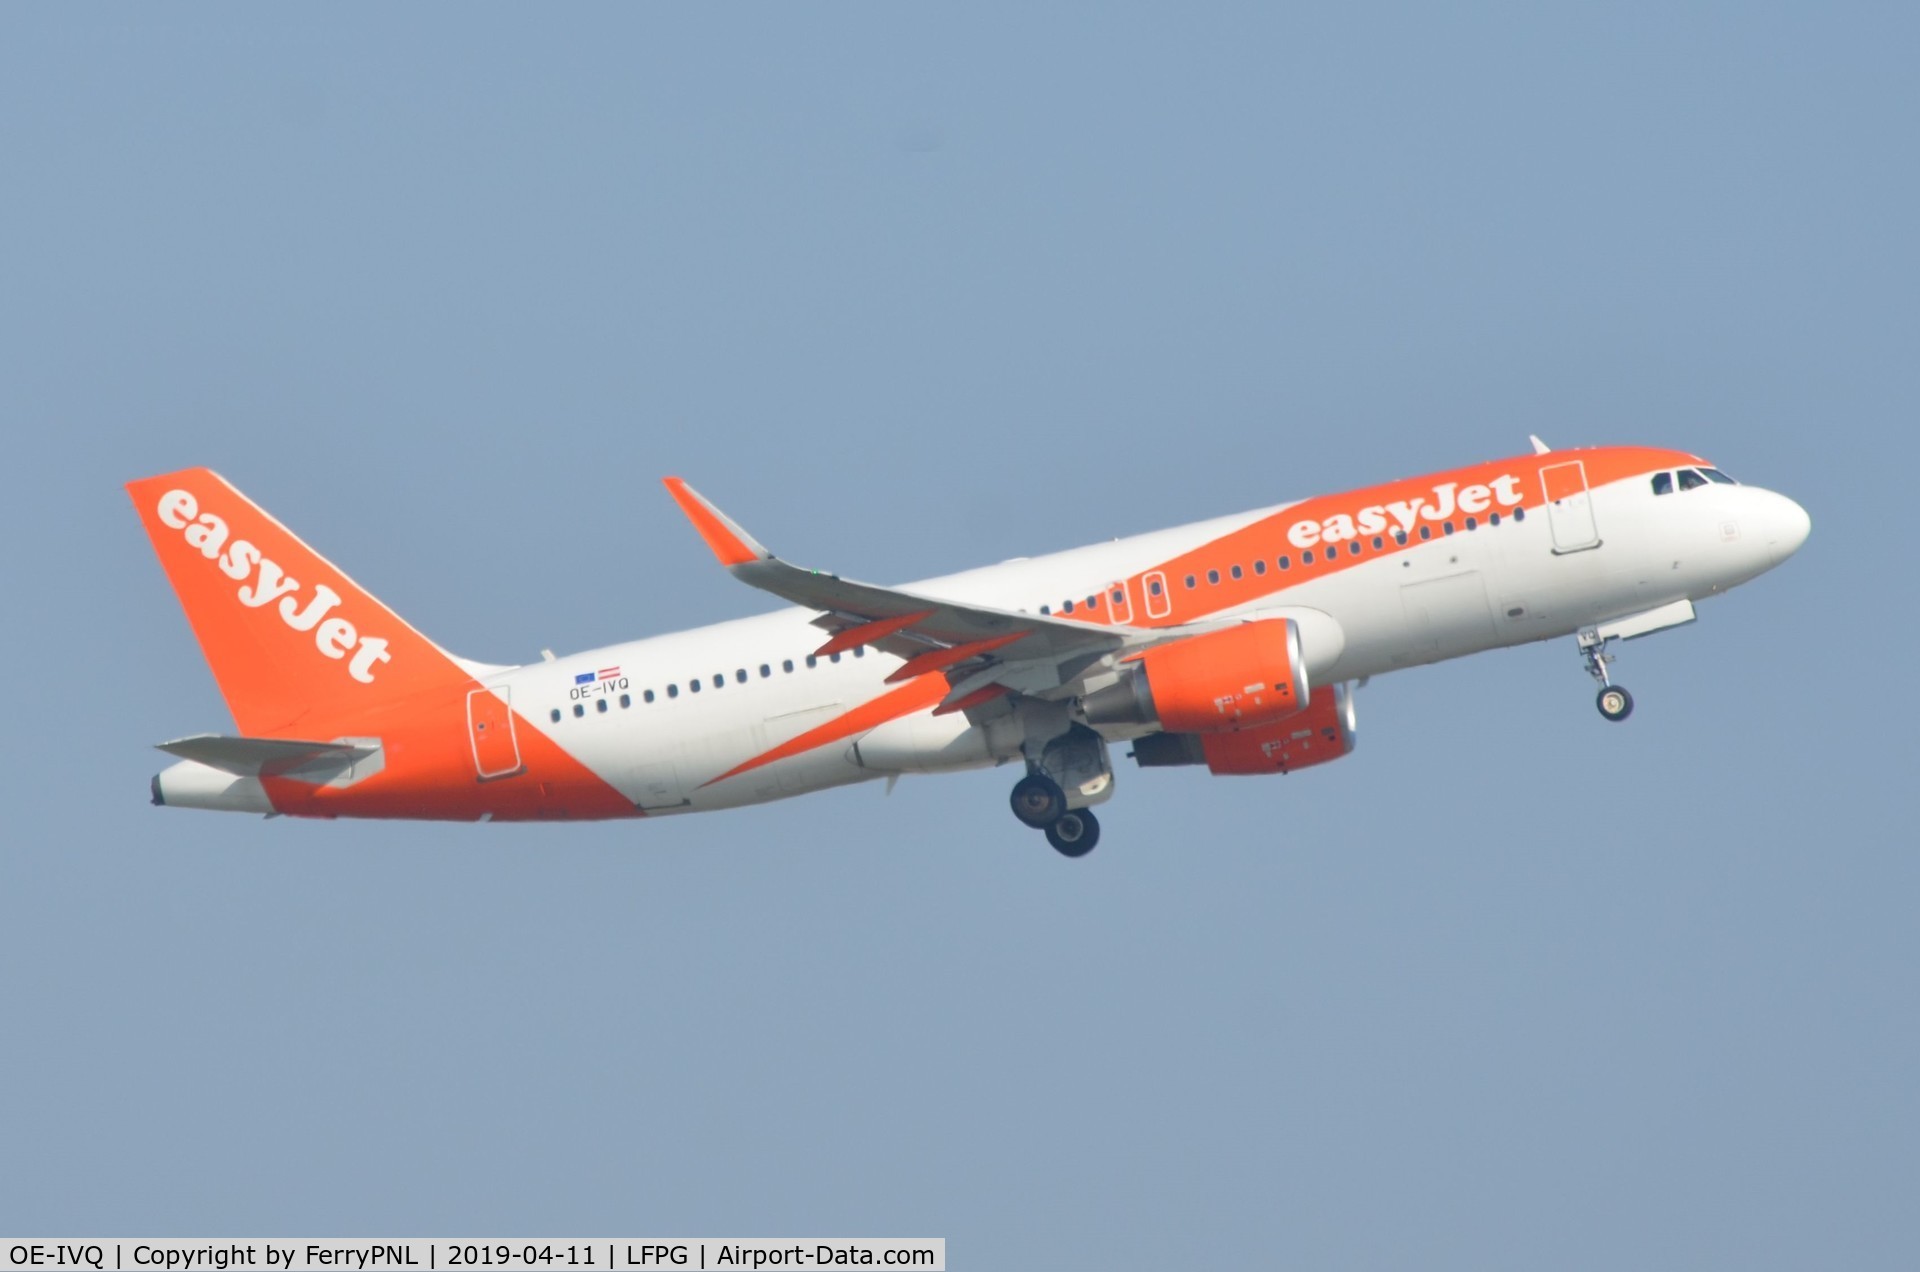 OE-IVQ, 2016 Airbus A320-214 C/N 7228, Easyjet A320 lifting-off